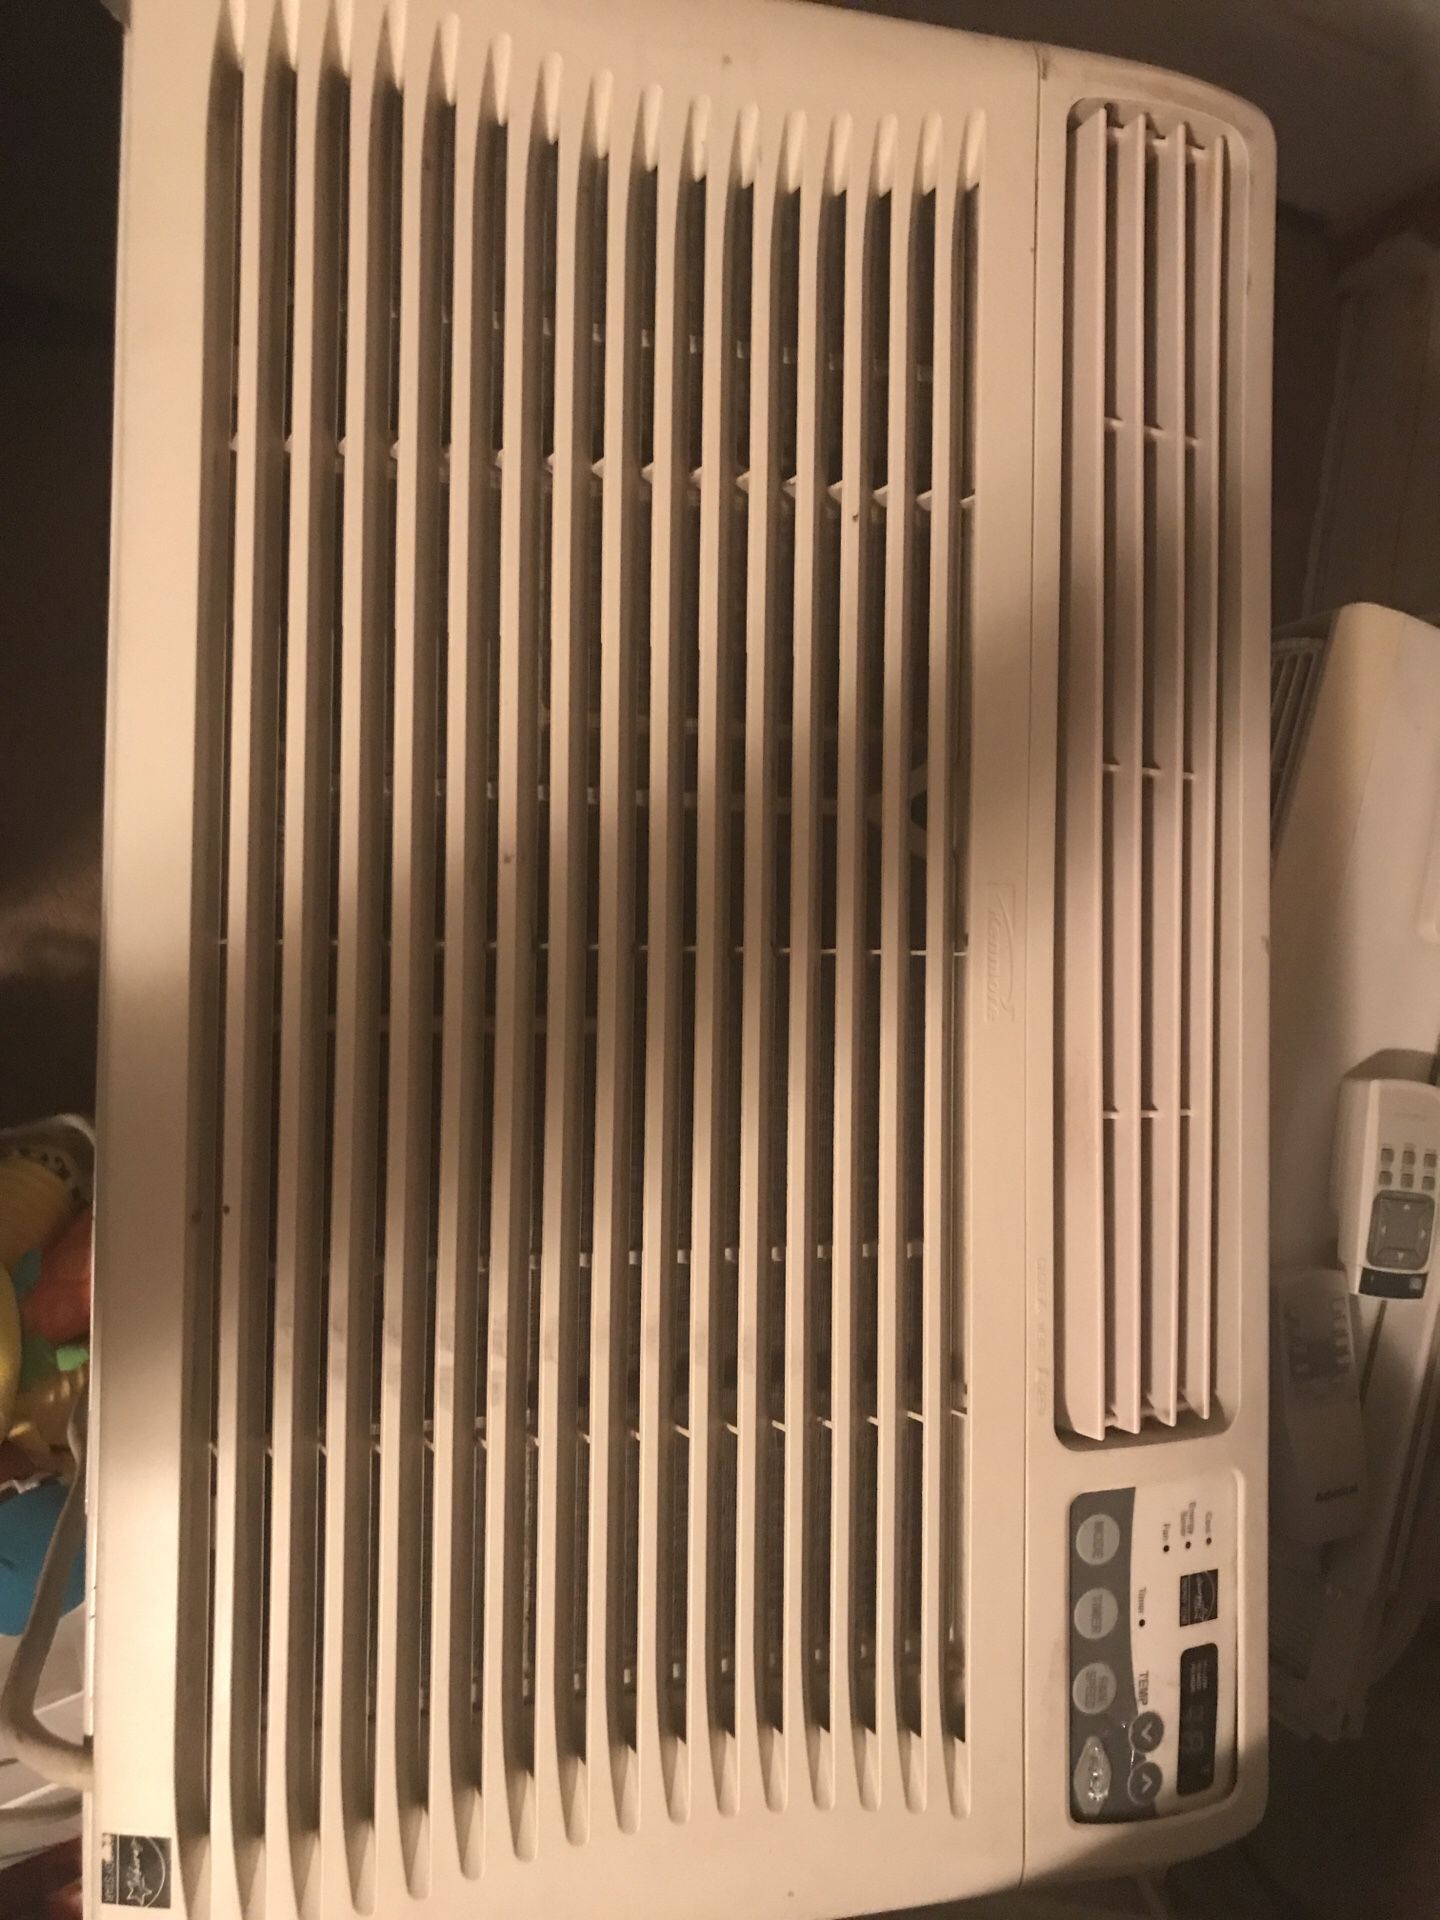 Kenmore 12,000 BTU air conditioner in like new condition